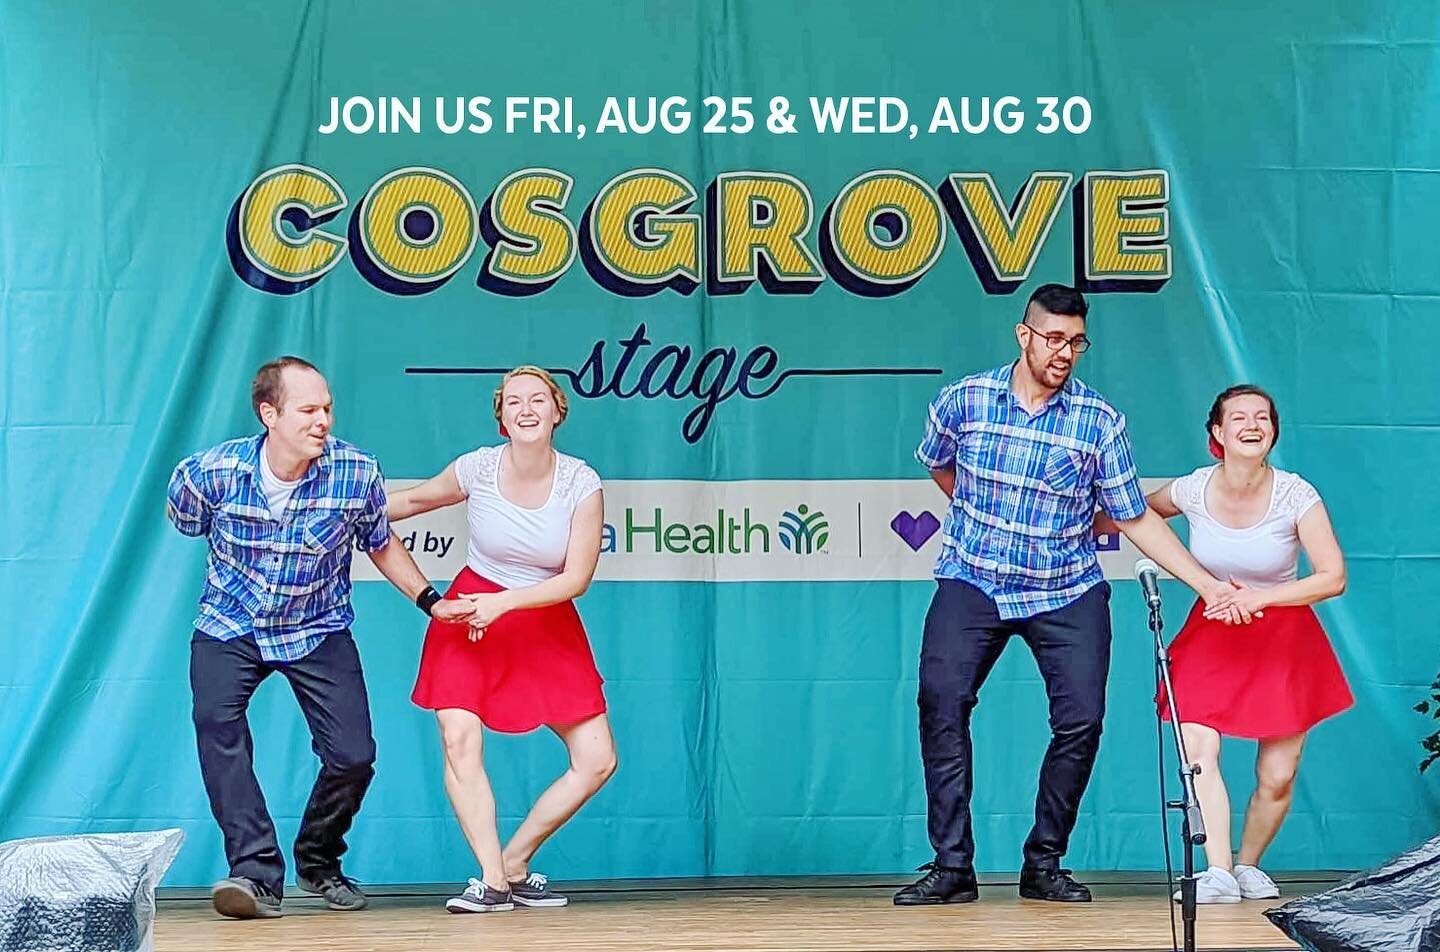 Working on your Minnesota State Fair schedule? Make sure to stop by the Cosgrove Stage by the Education Building and watch one of our history of swing shows. We will be performing Friday, Aug 25th at 3:30 pm, 4:30 pm &amp; 5:30 pm and Wednesday, Aug 